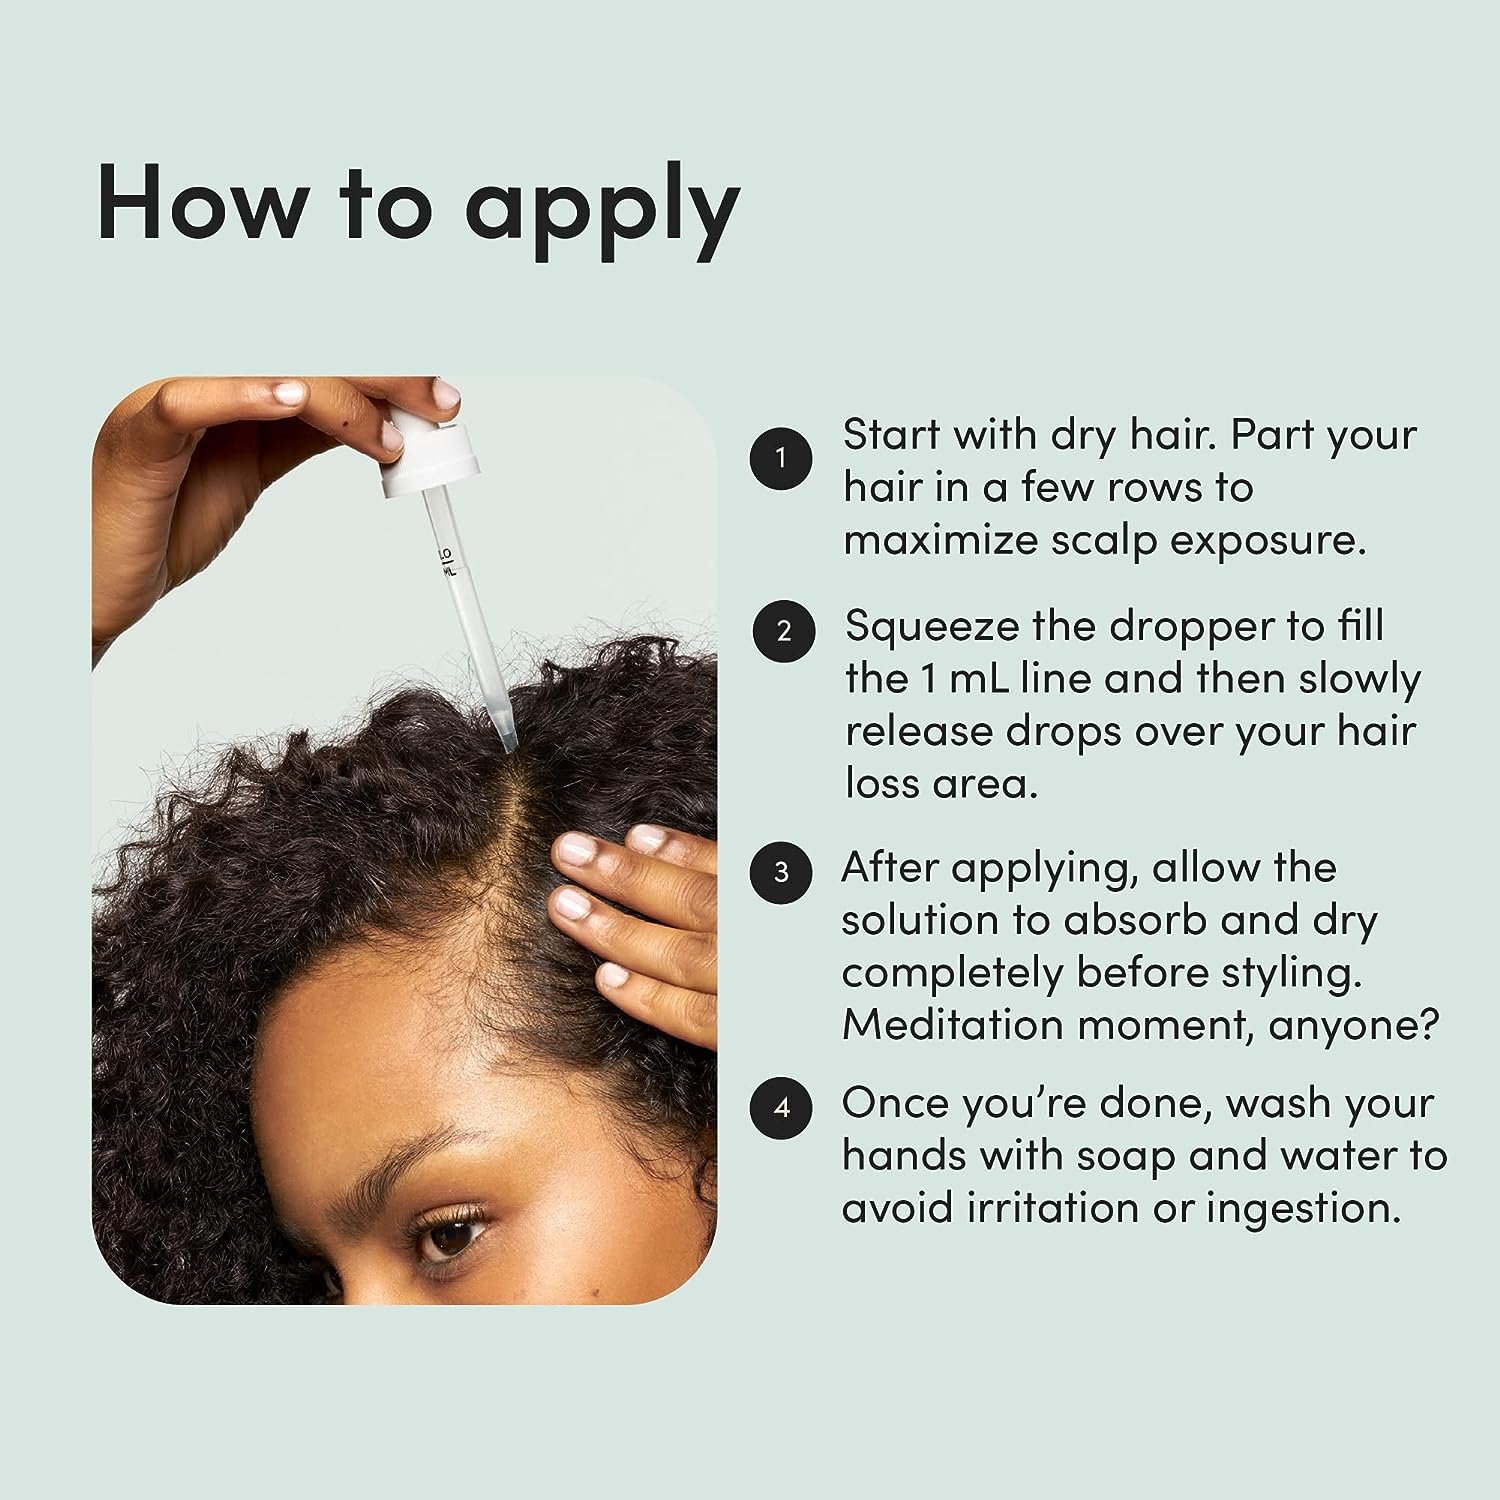 How to apply hers Hair Regrowth Treatment